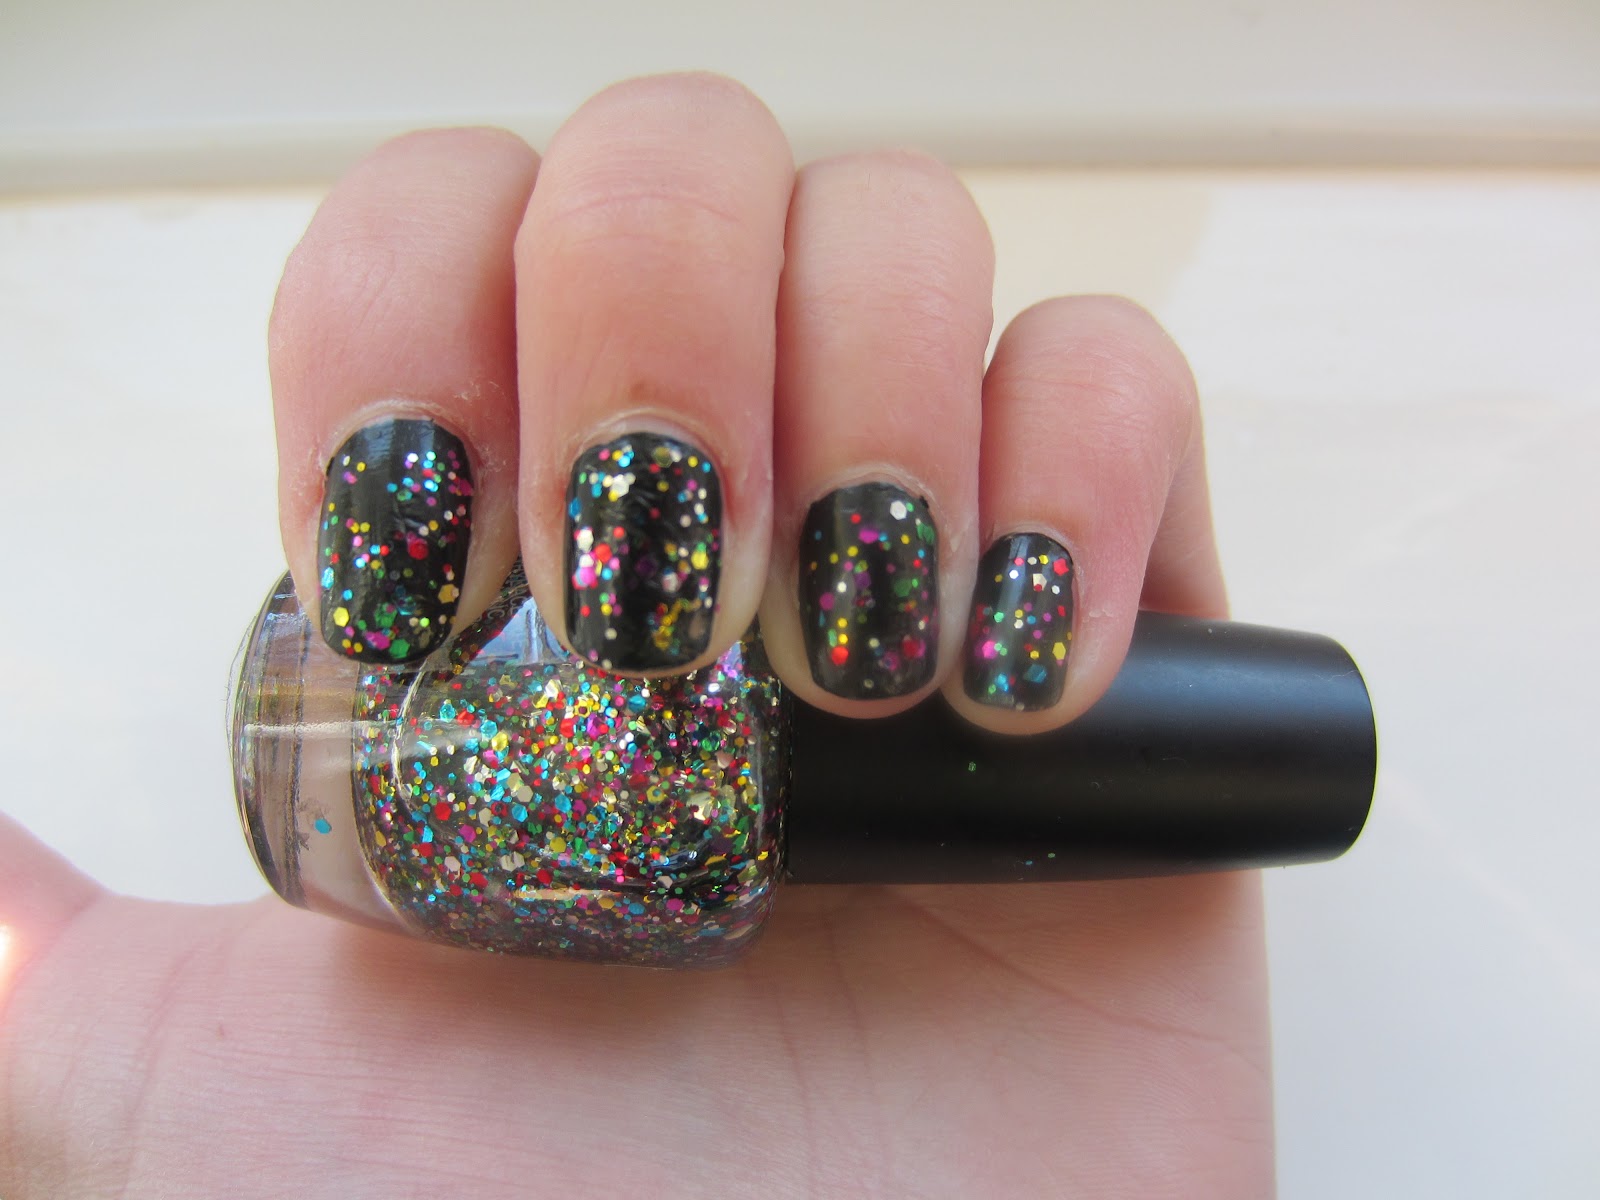 3. Colorful Disco Nails - wide 10